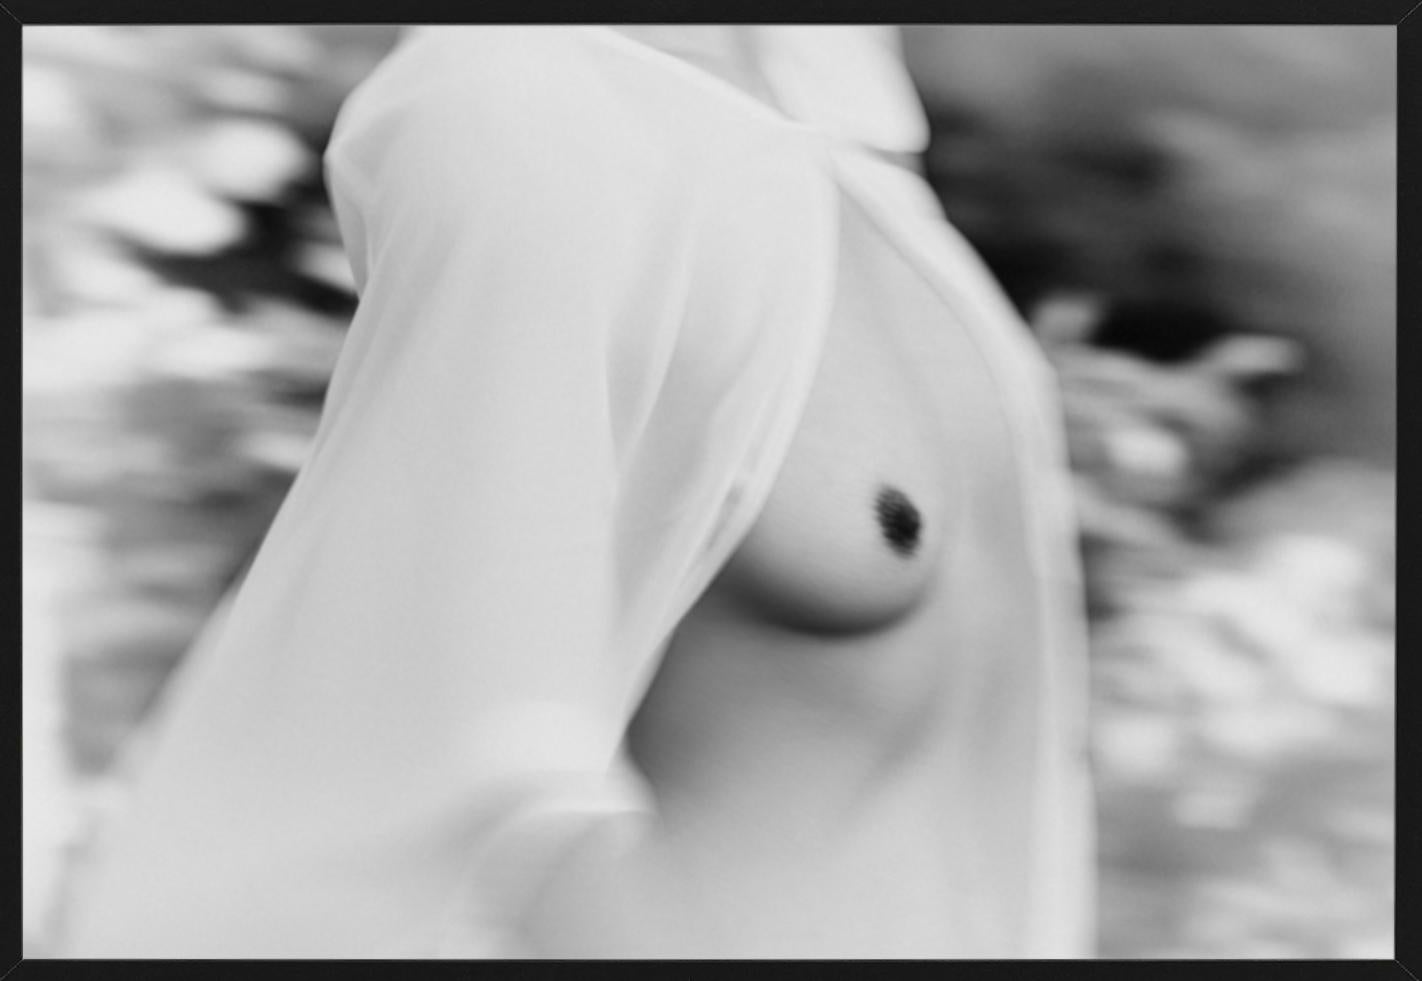 Judith - black and white nude showing exposed breasts under a white silk blouse - Photograph by Tina Trumpp